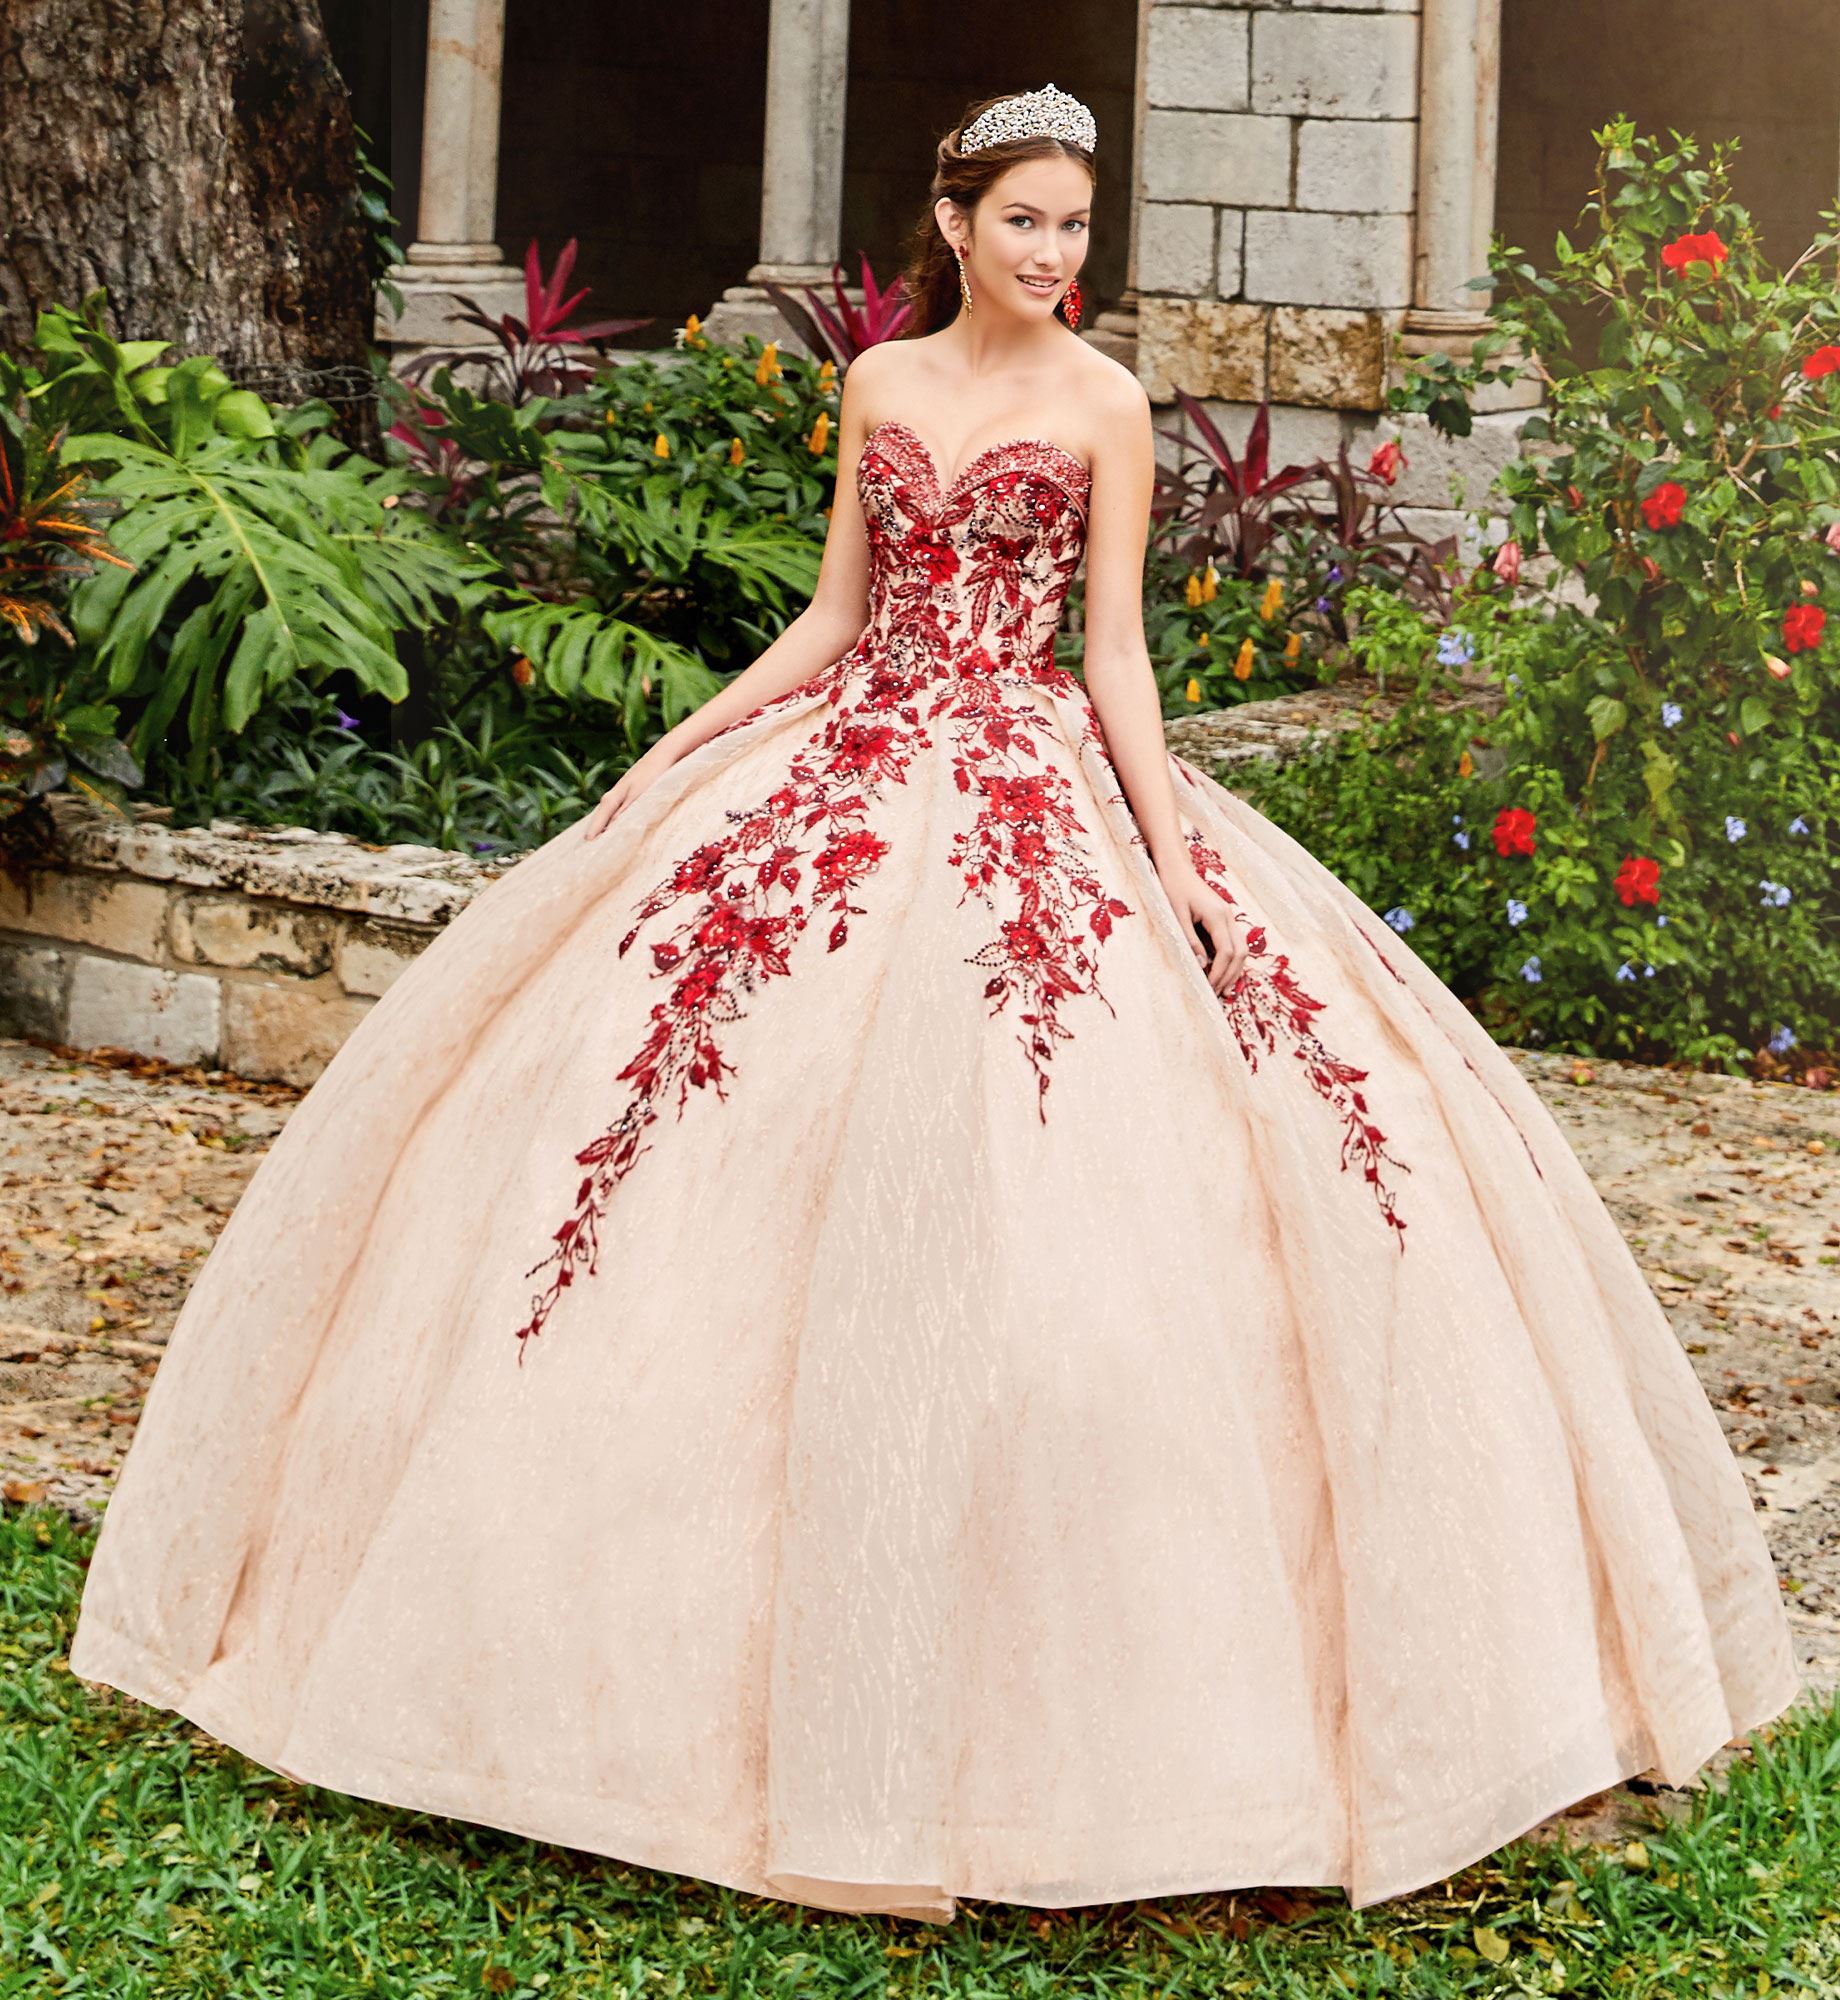 Brunette model in red and gold strapless quinceañera dress